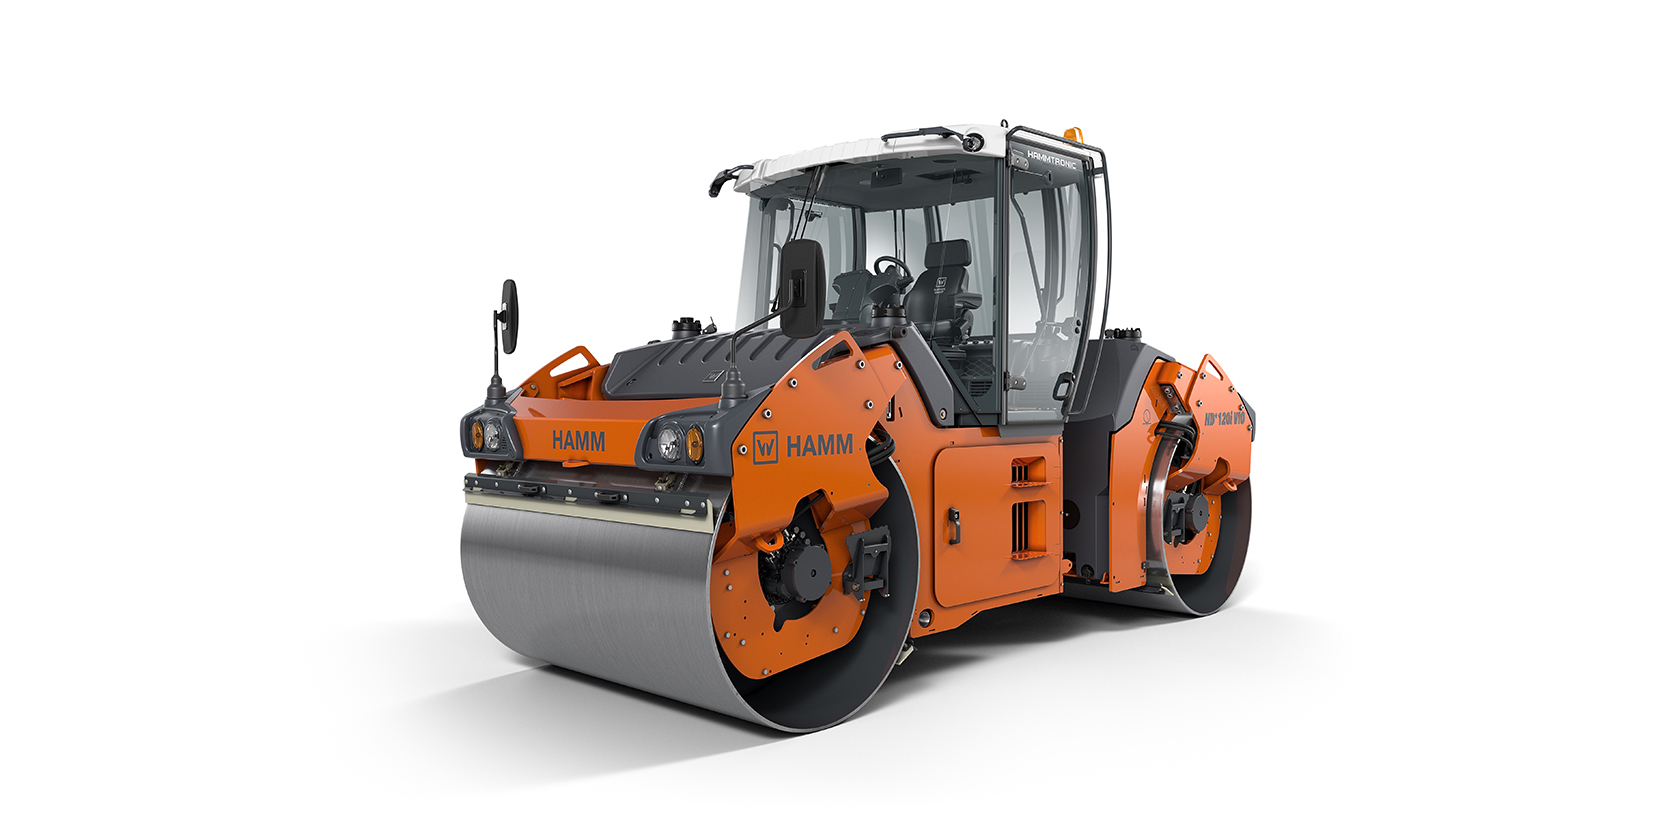 New HD+ 120i V-VIO tandem roller: The VIO drums give operators the choice of compacting with either vibration or oscillation.